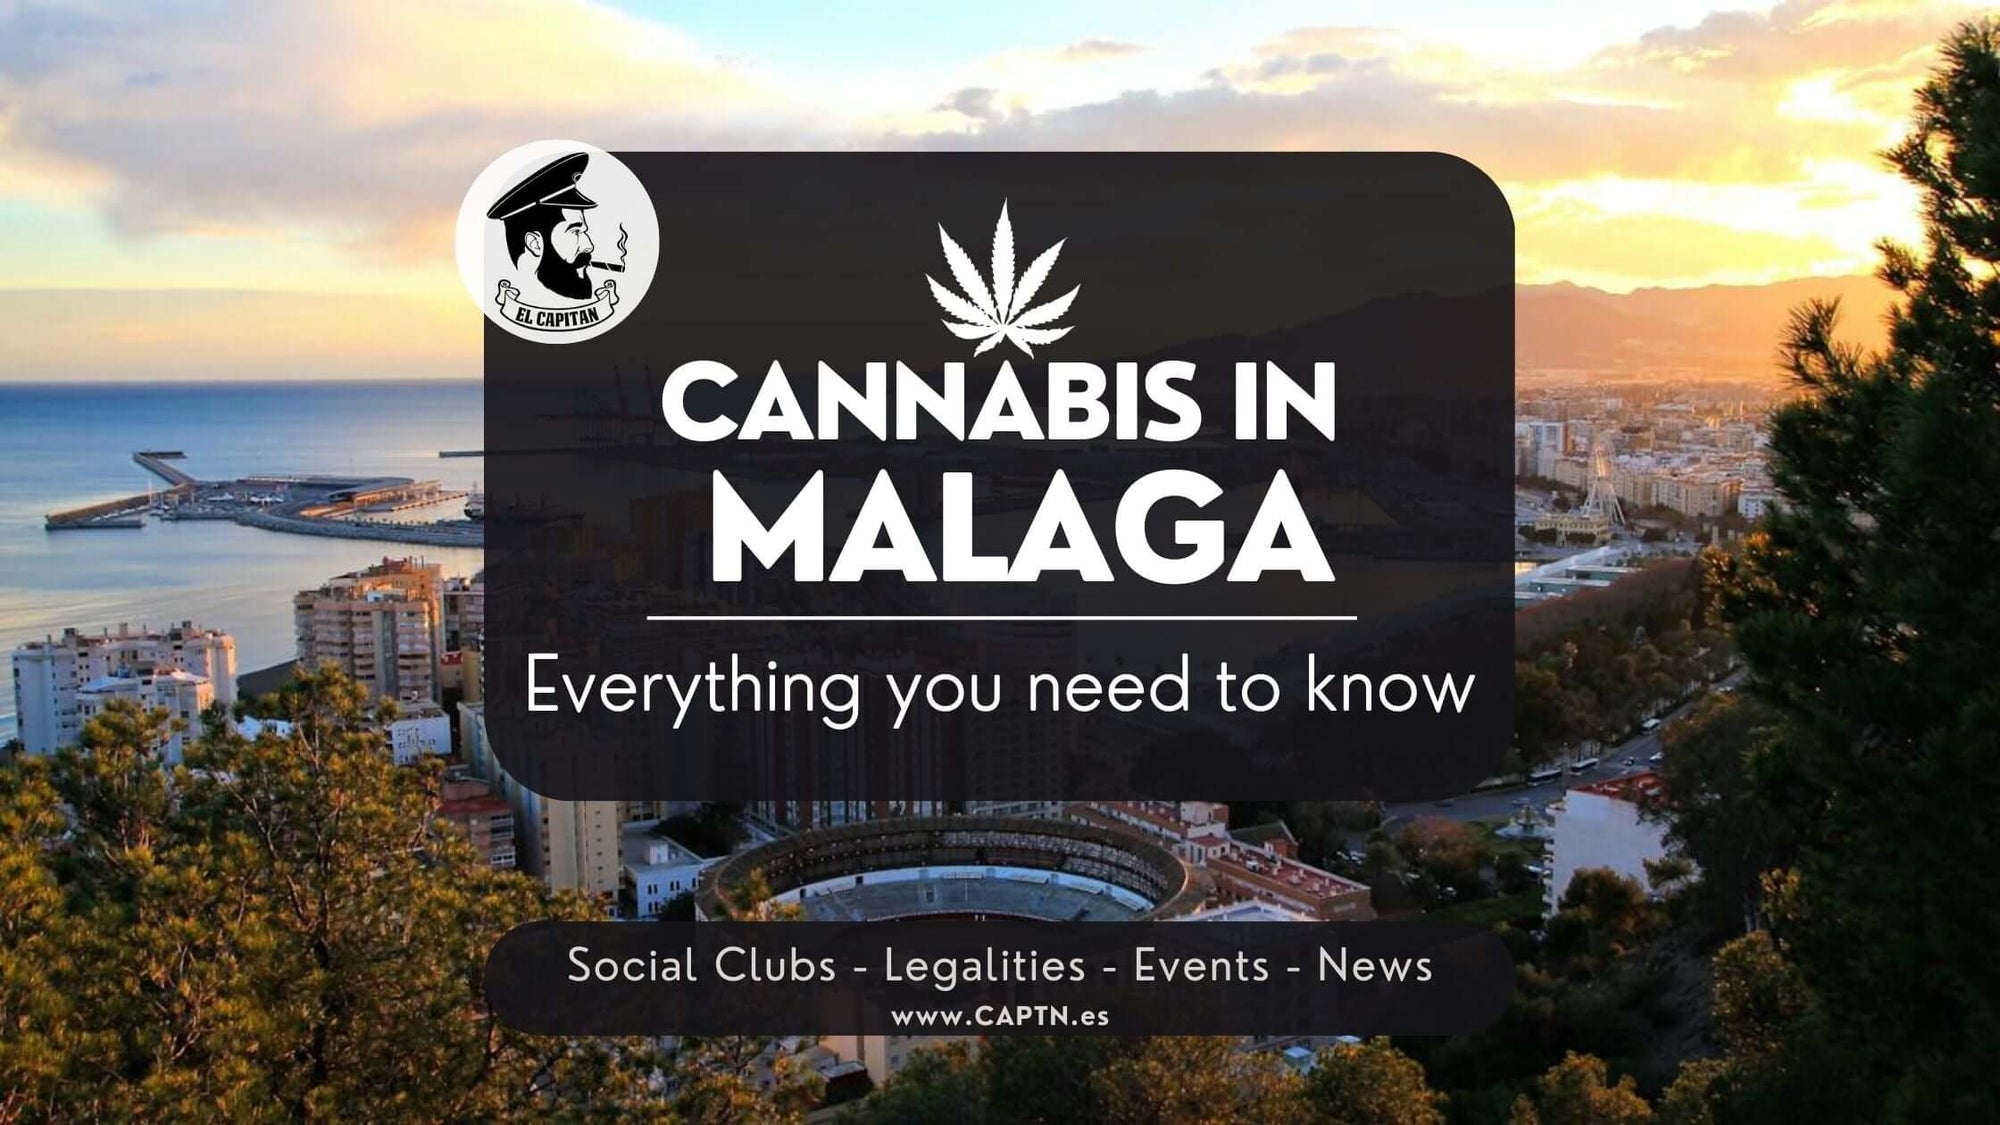 el capitan showing the way to a cannabis social club in malaga for weed